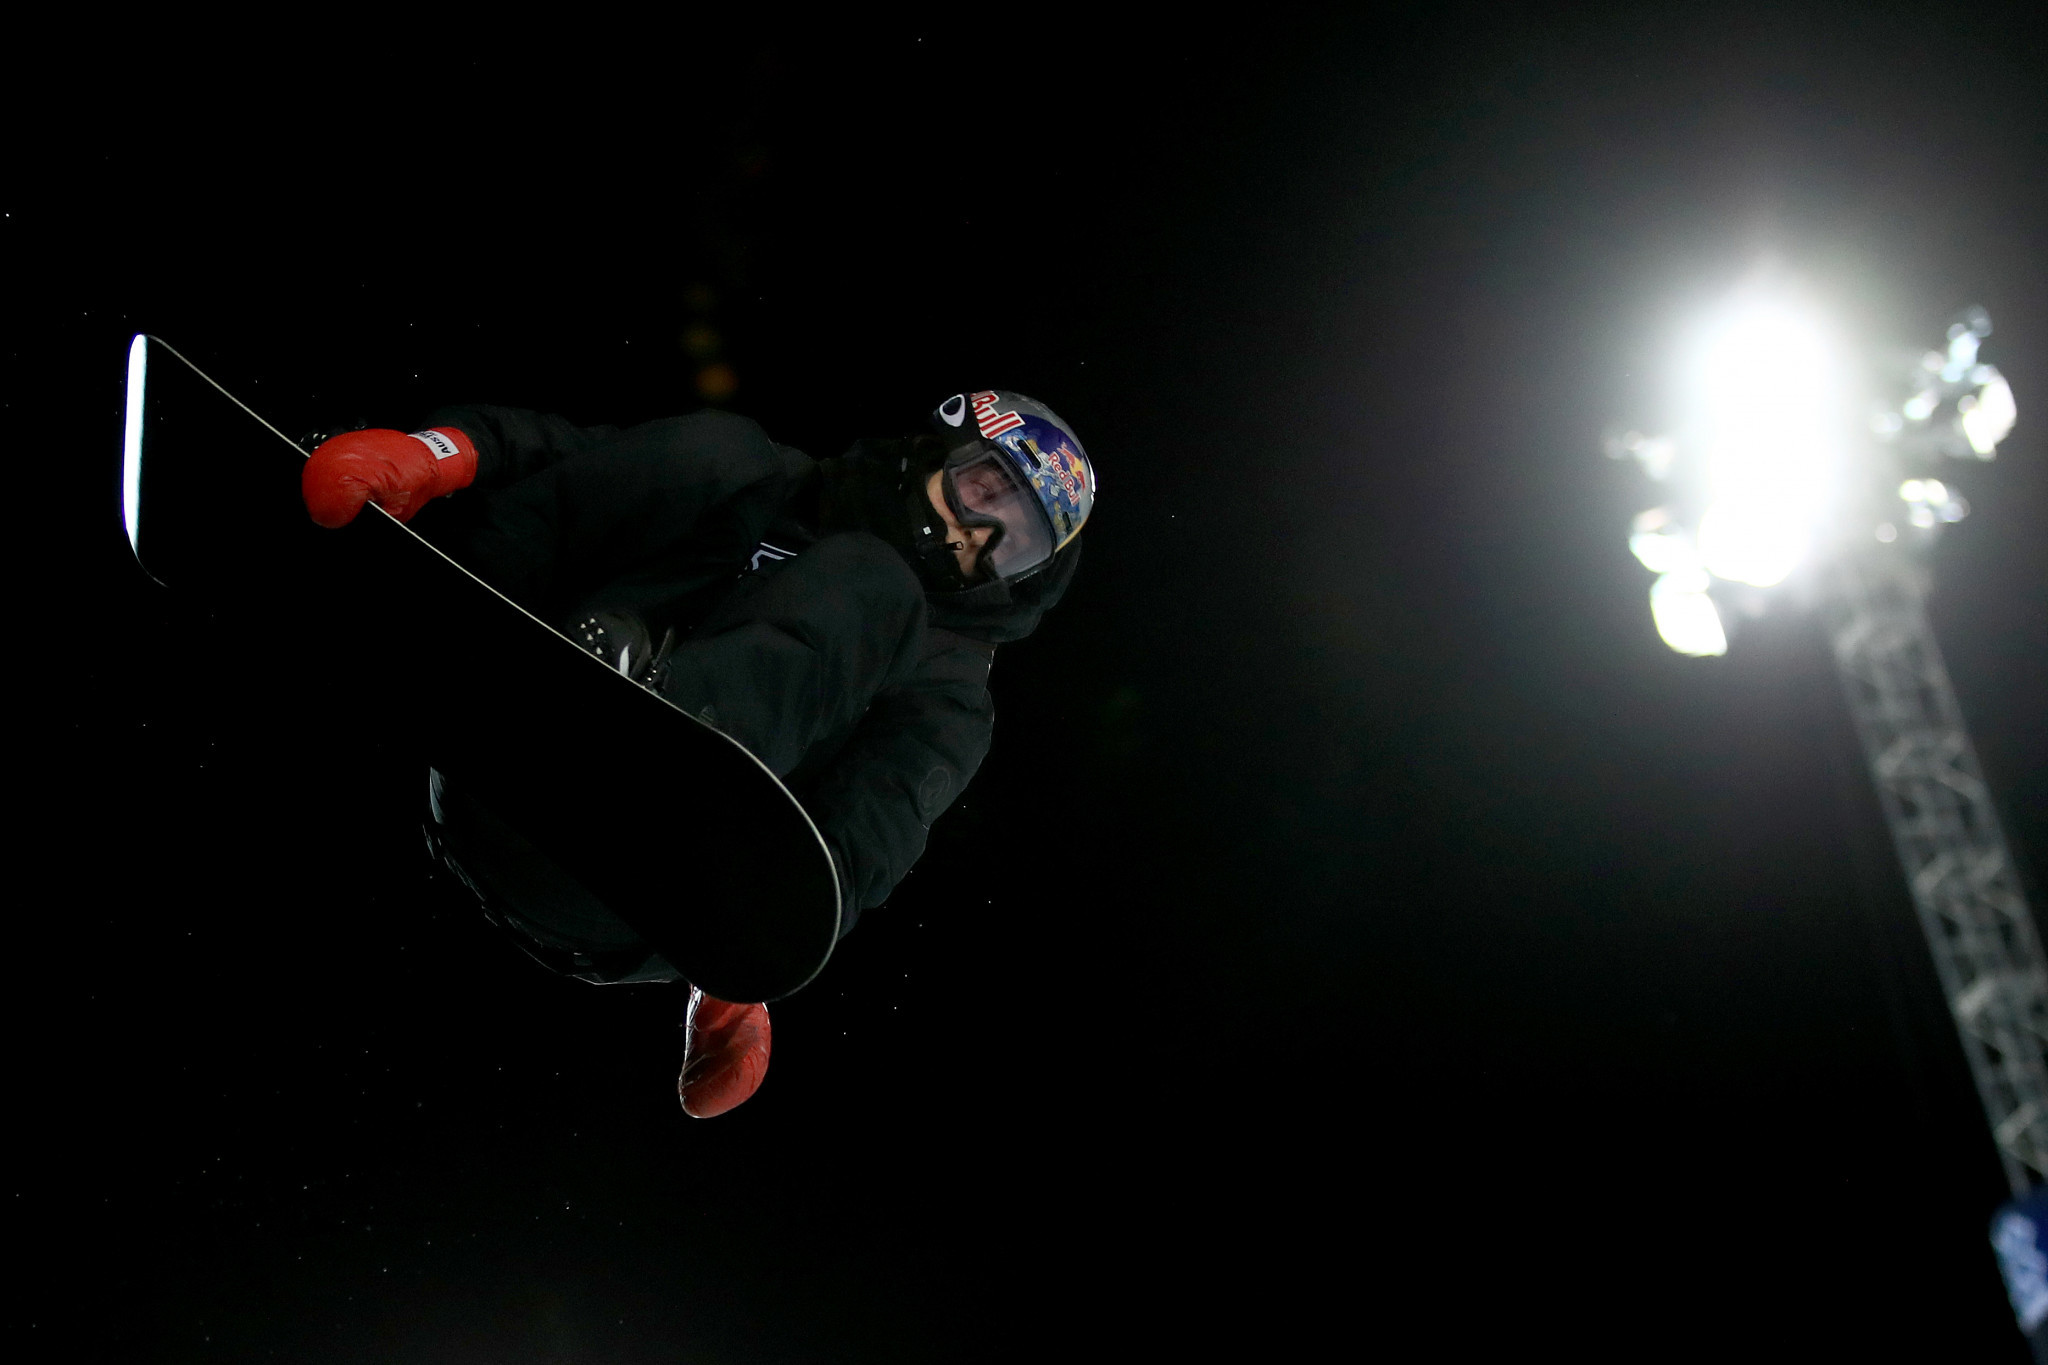 Olympic medallist James clinches snowboard superpipe gold on final day at Winter X Games